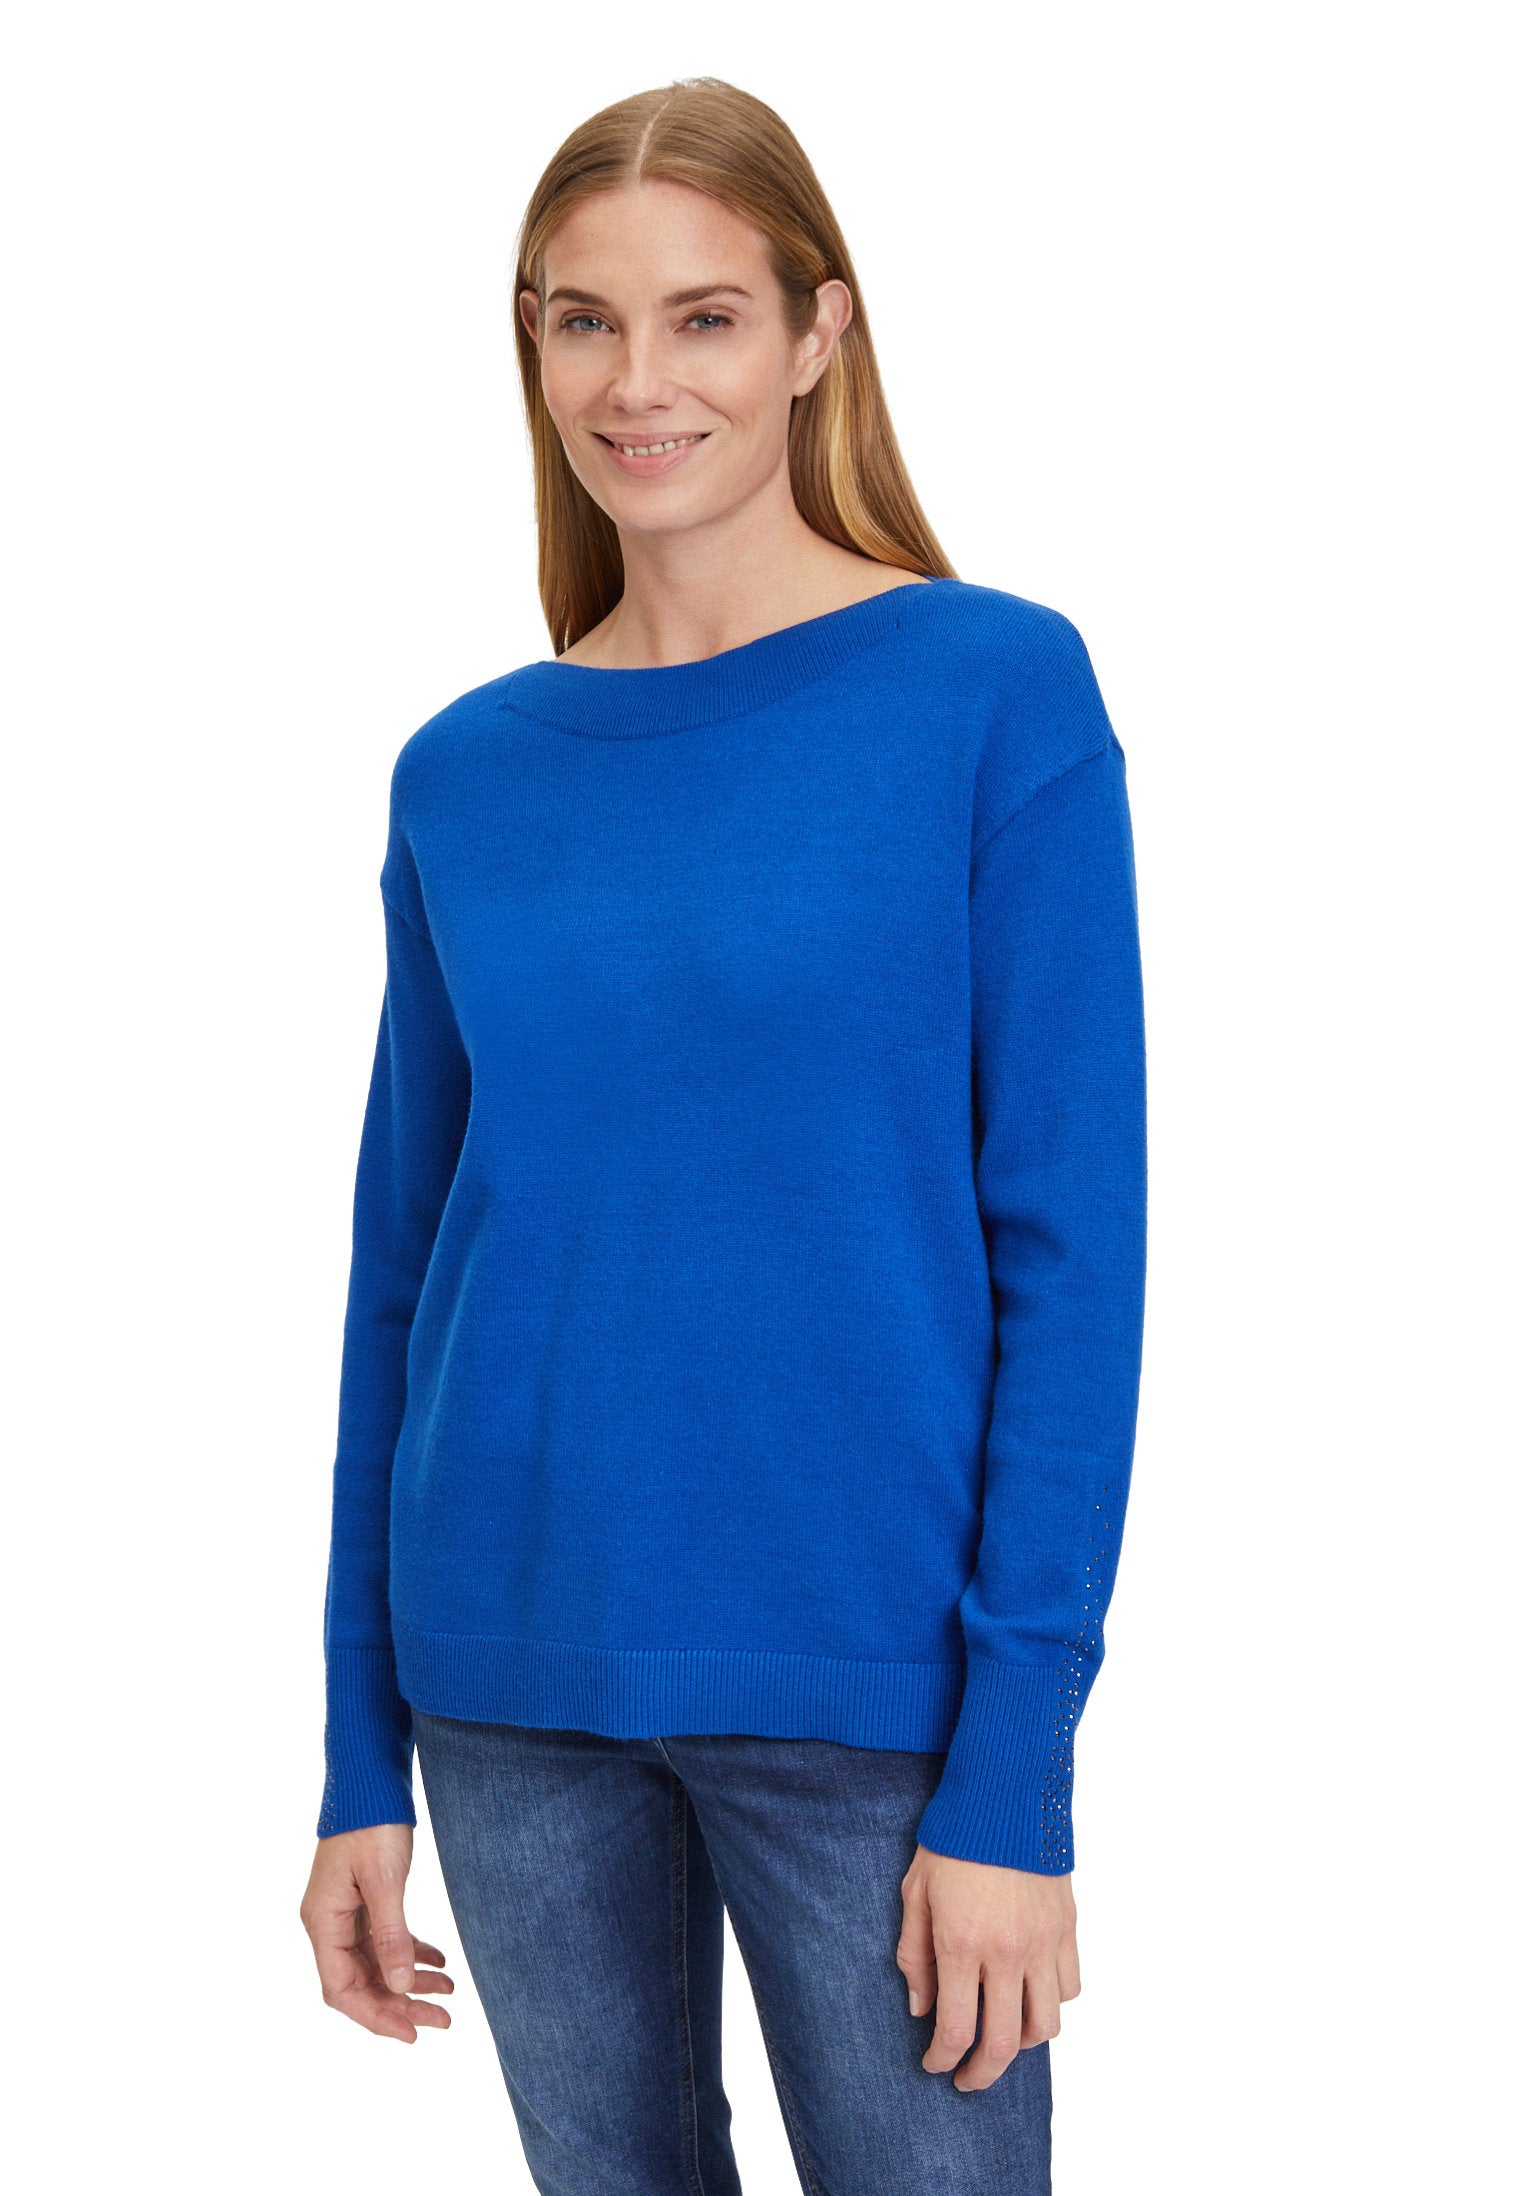 Long Sleeve Pullover With Mockneck_5003-1026_8329_03